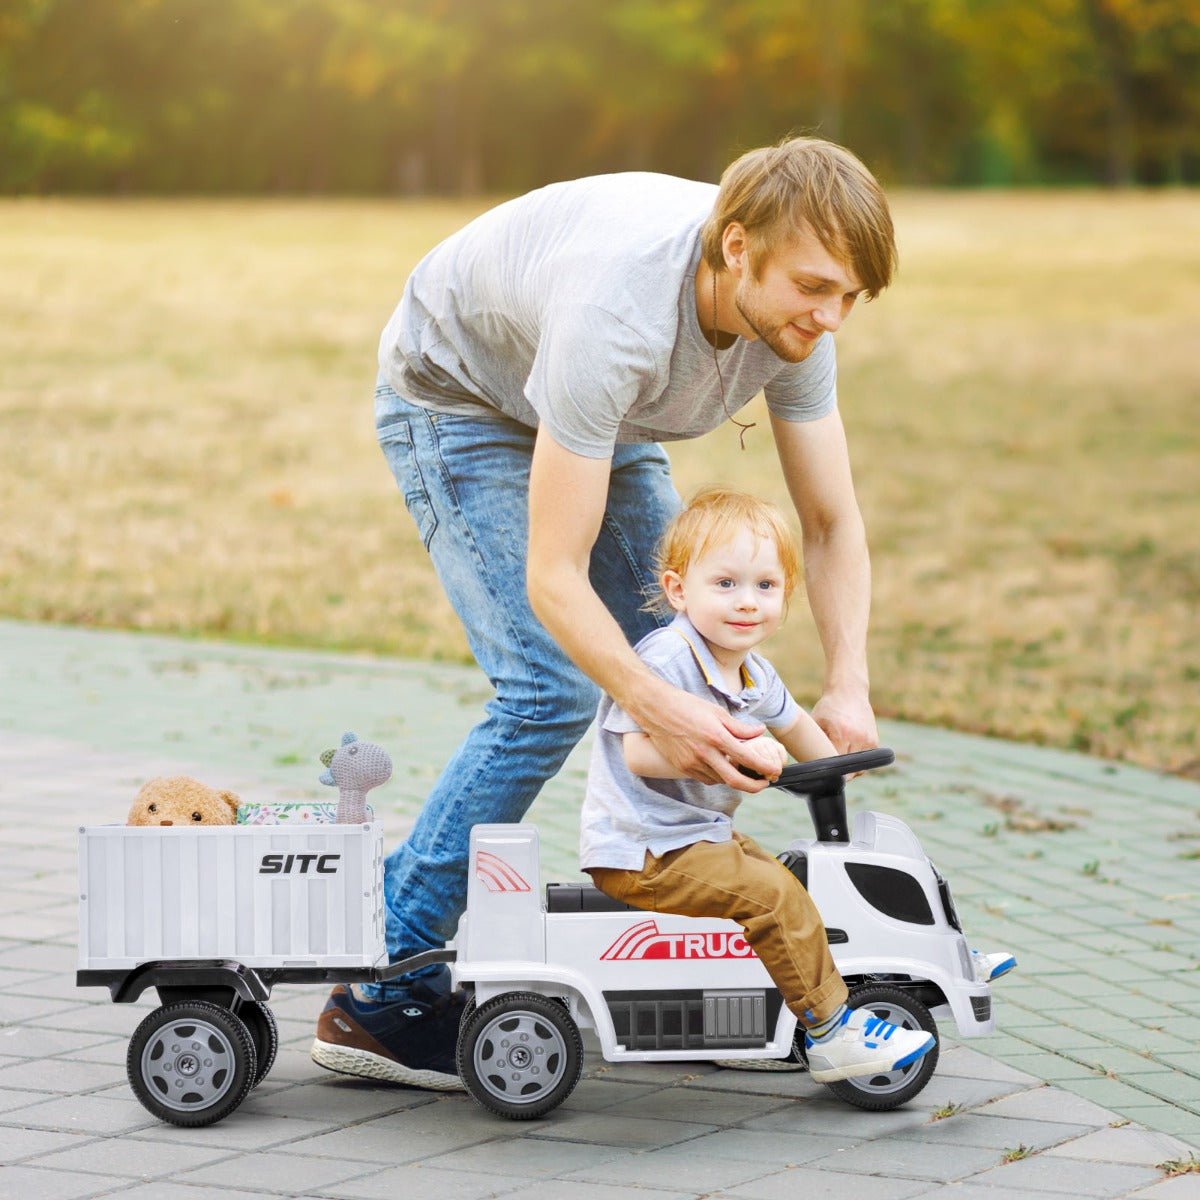 Discover Adventure with a Kids Ride On Truck in White